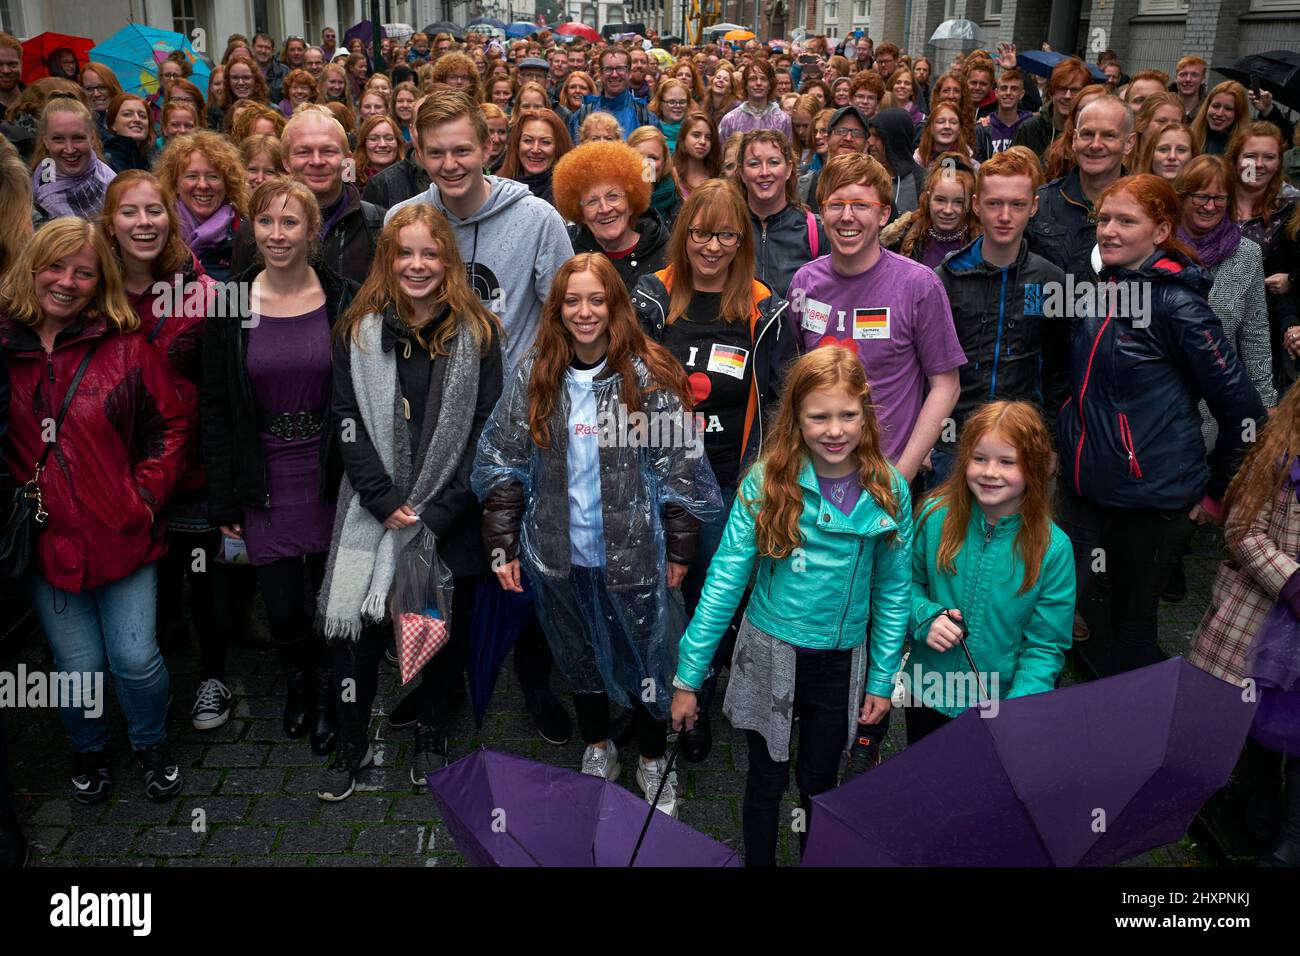 Is celebrated in the Dutch city of Breda the Redhead Days. It is an event that brings together red-haired people from all over the world every year. Stock Photo